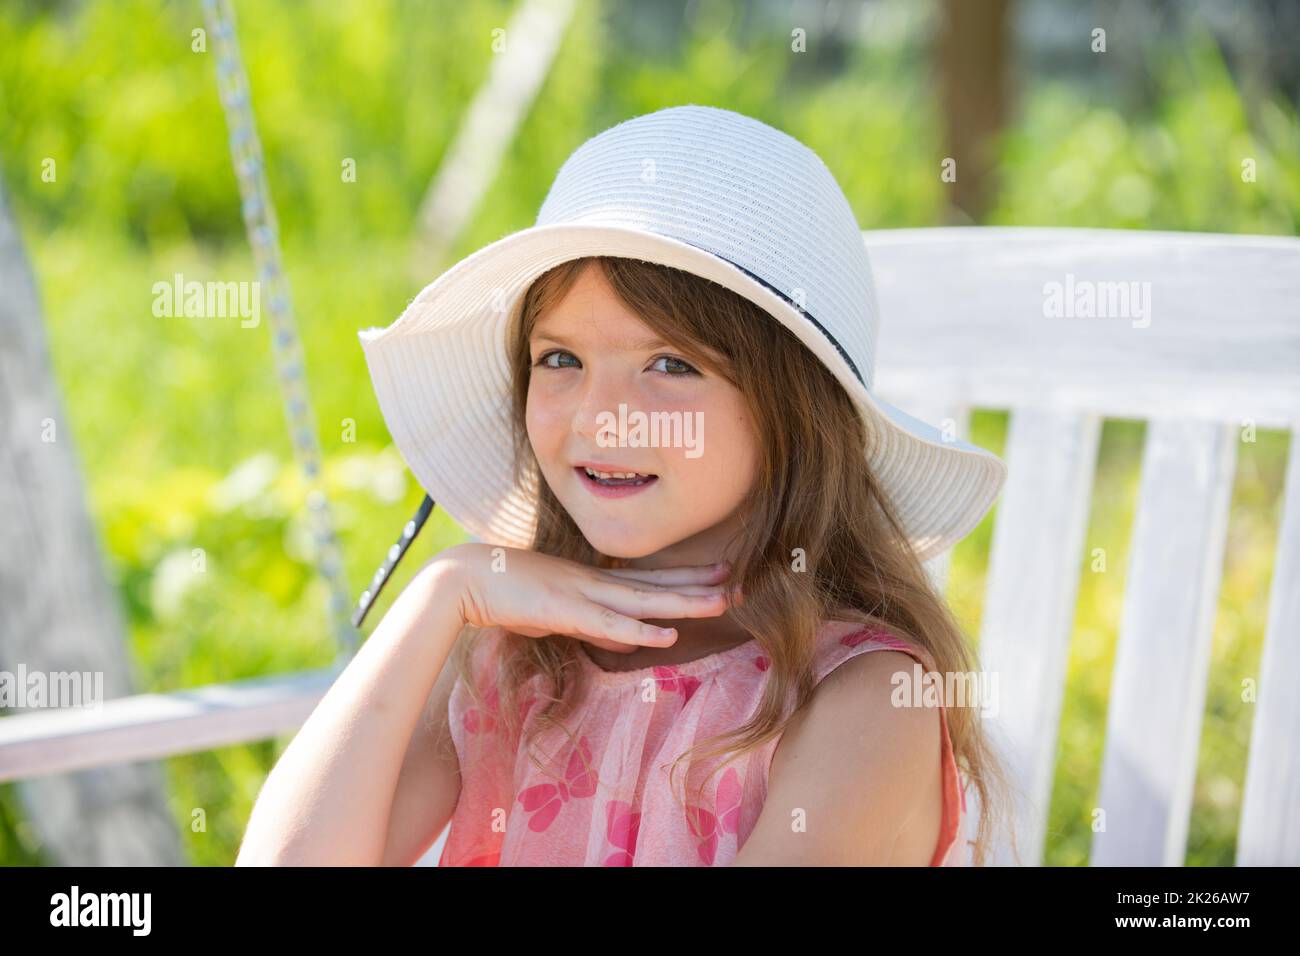 Teen girl outdoors, close-up. Portrait of attractive little teen with beautiful happy smiling face. Nature childhood leisure concept. Cute child. Stock Photo